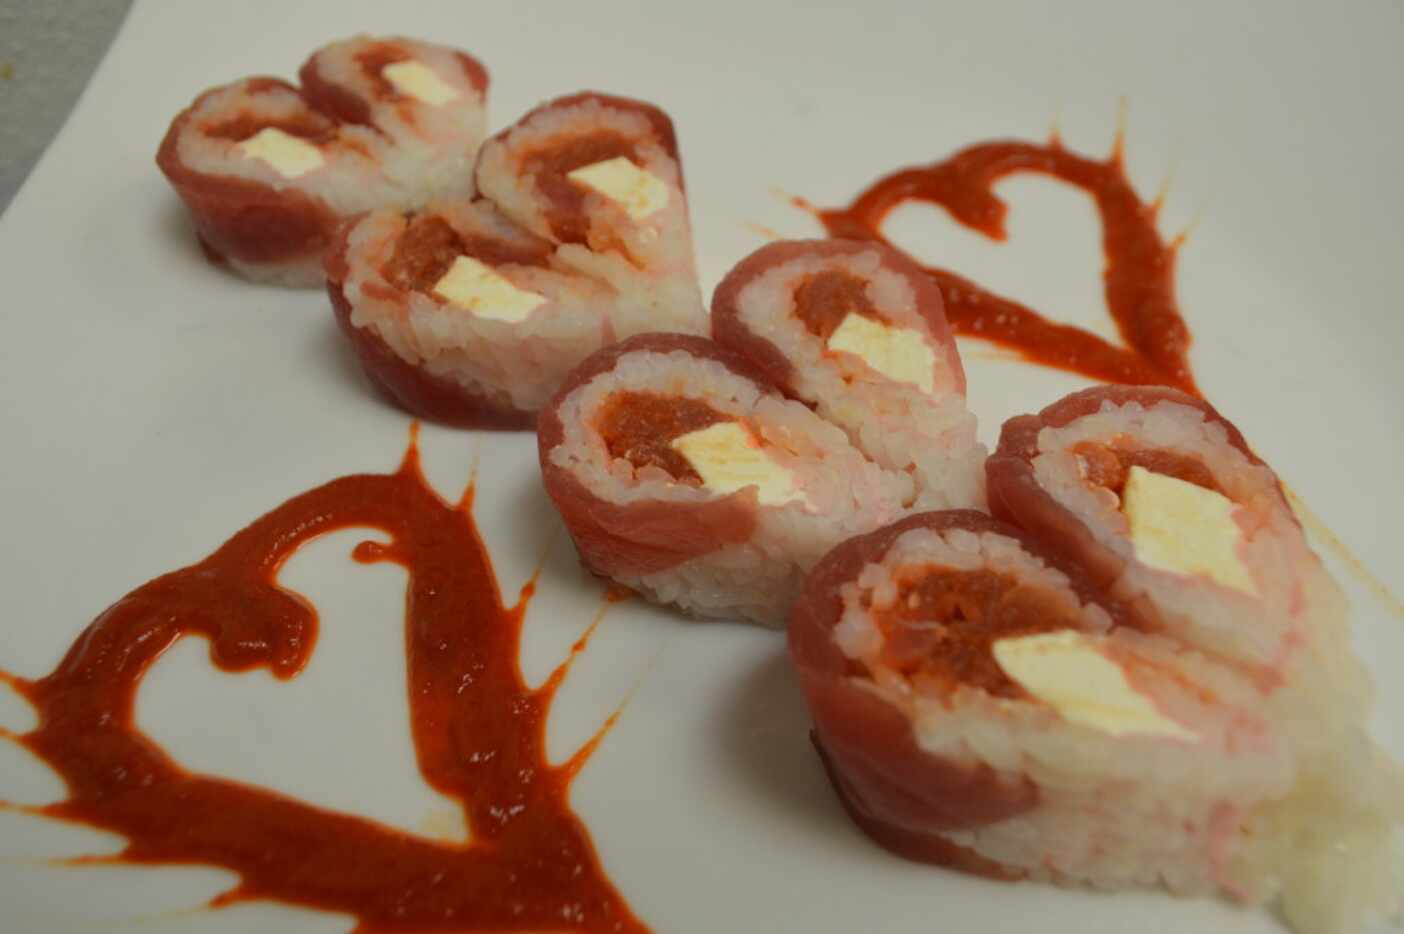 Hibashi will serve sushi dishes with Valentine's Day touches.